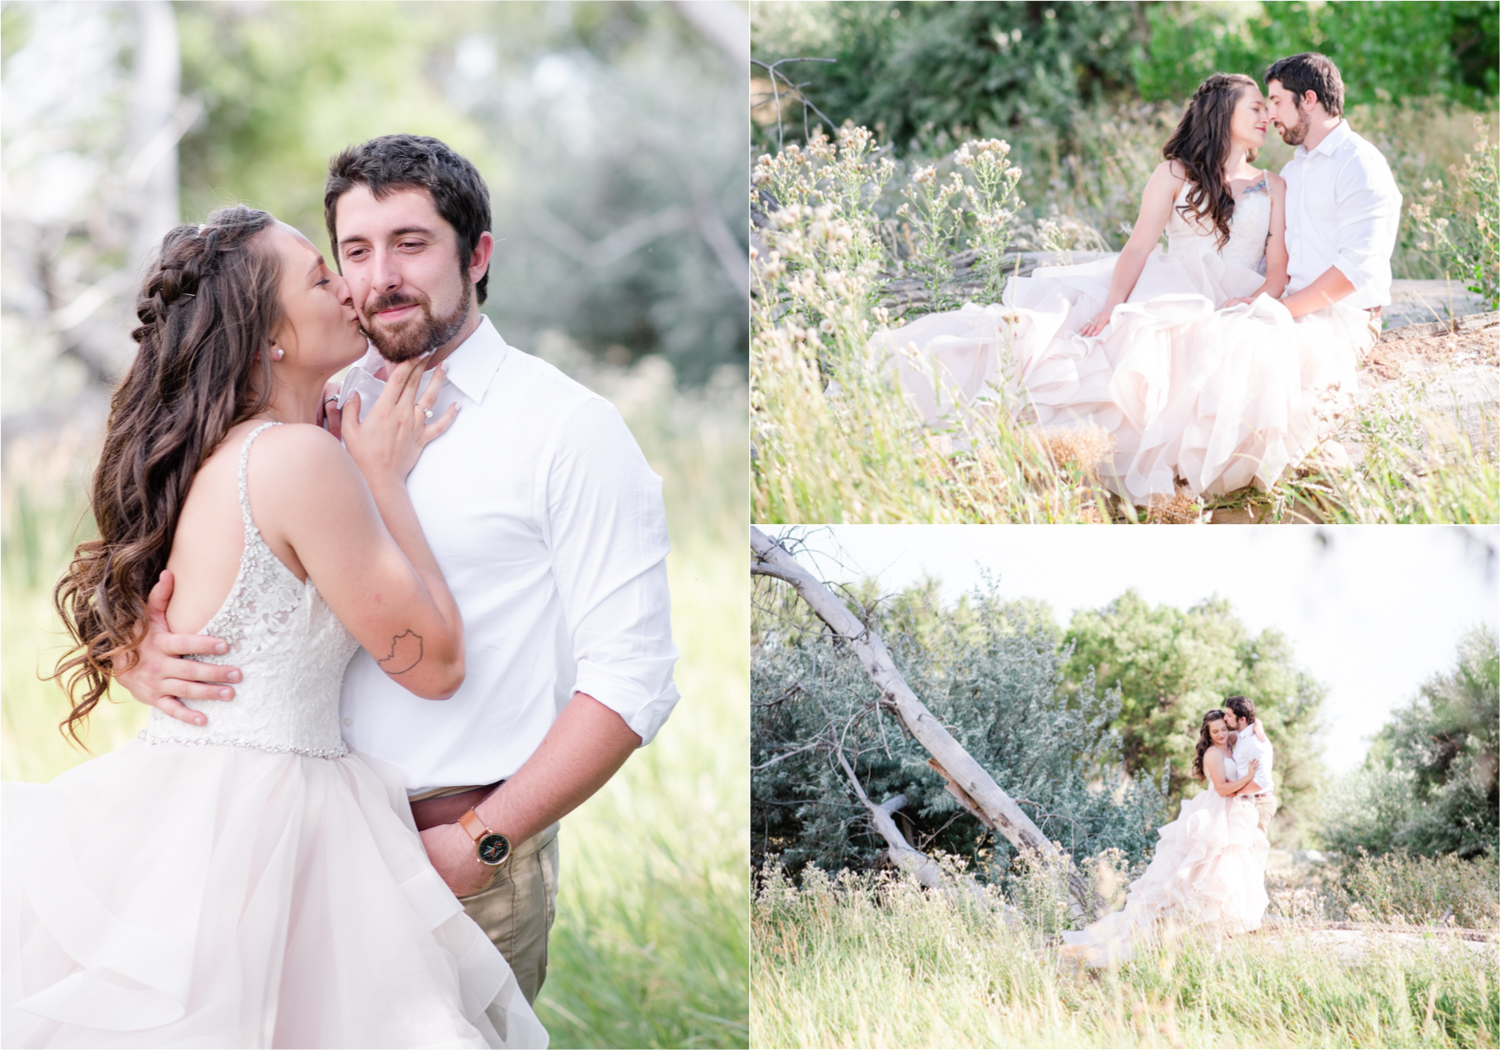 Rustic Country Glam Wedding during Summer in Northern Colorado with first look and a romantic country dance | Britni Girard Photography - Greeley, Colorado